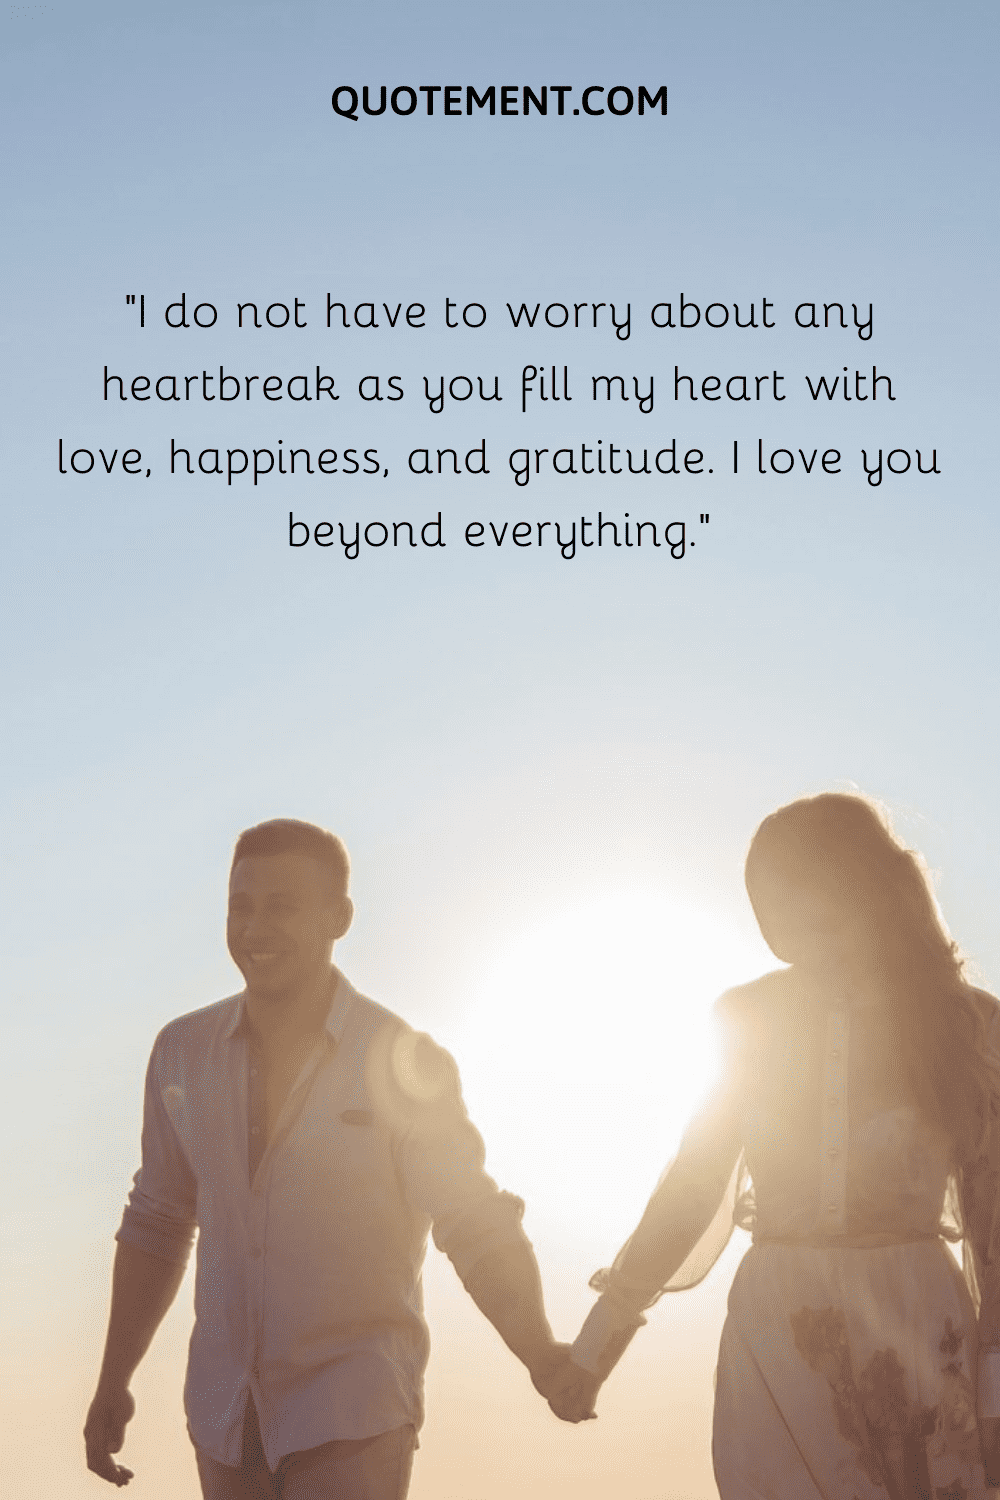 “I do not have to worry about any heartbreak as you fill my heart with love, happiness, and gratitude. I love you beyond everything.”